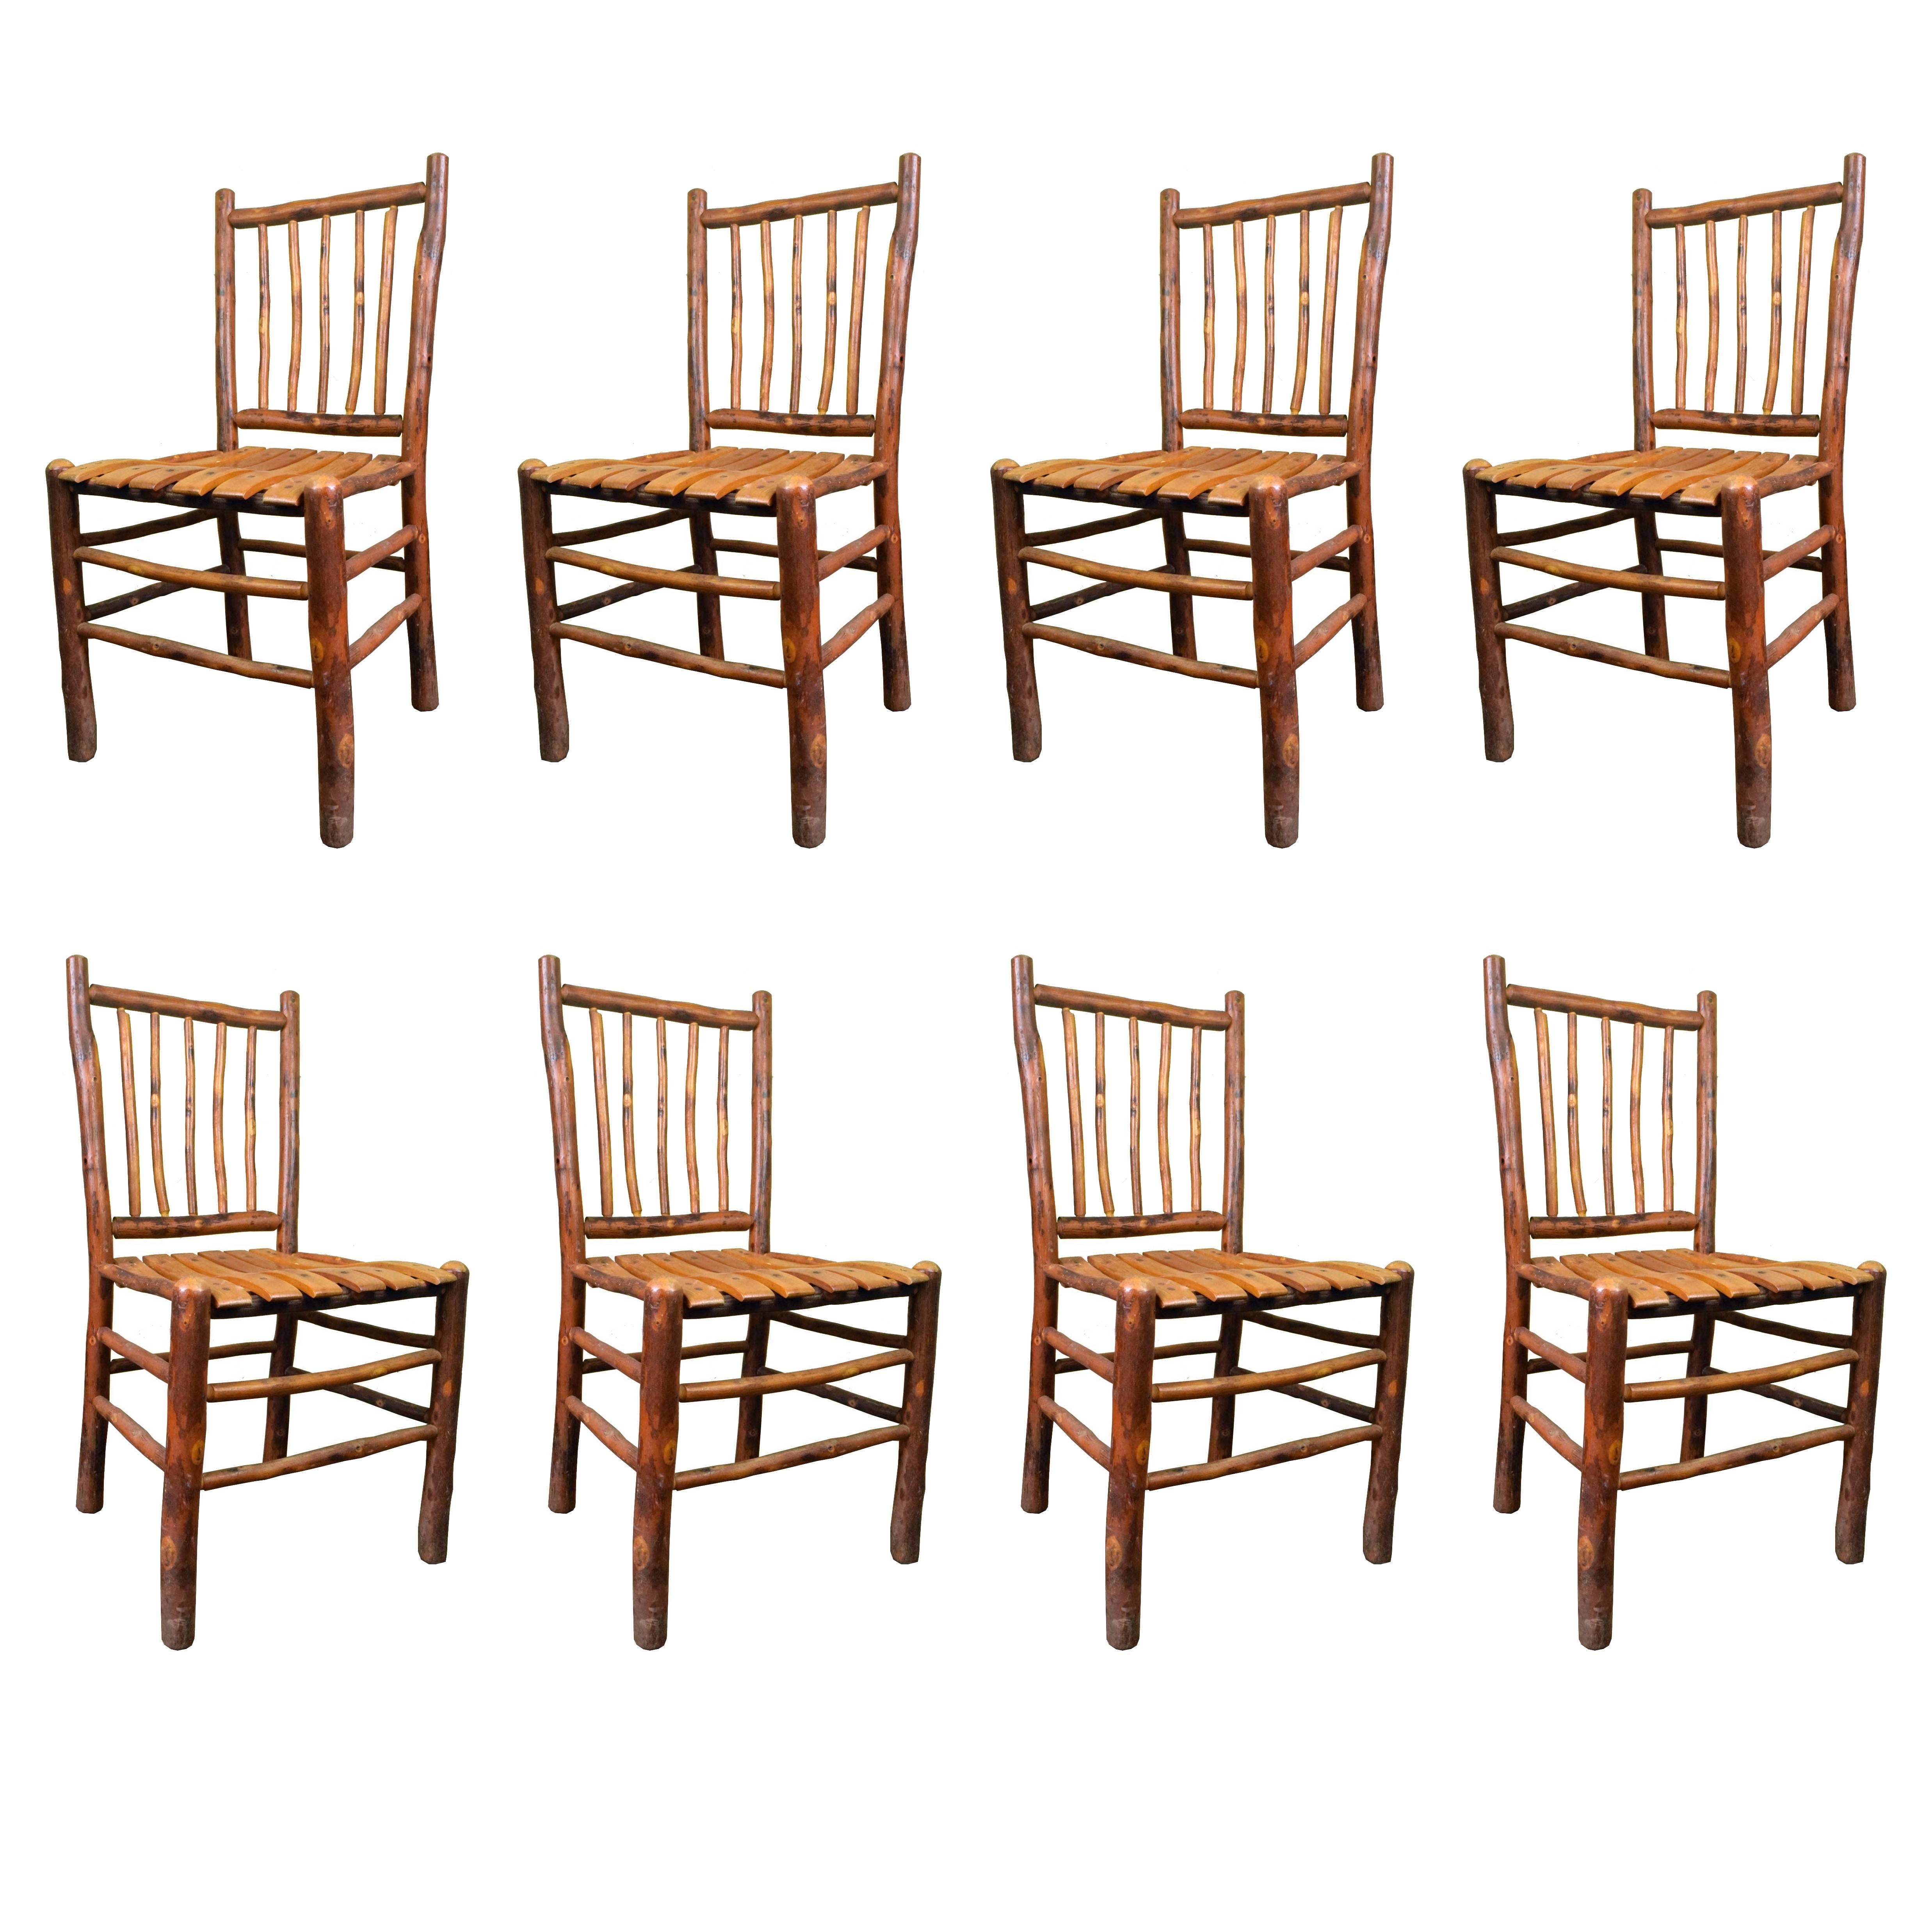 Original Old Hickory Bentwood Chair, Set of Eight